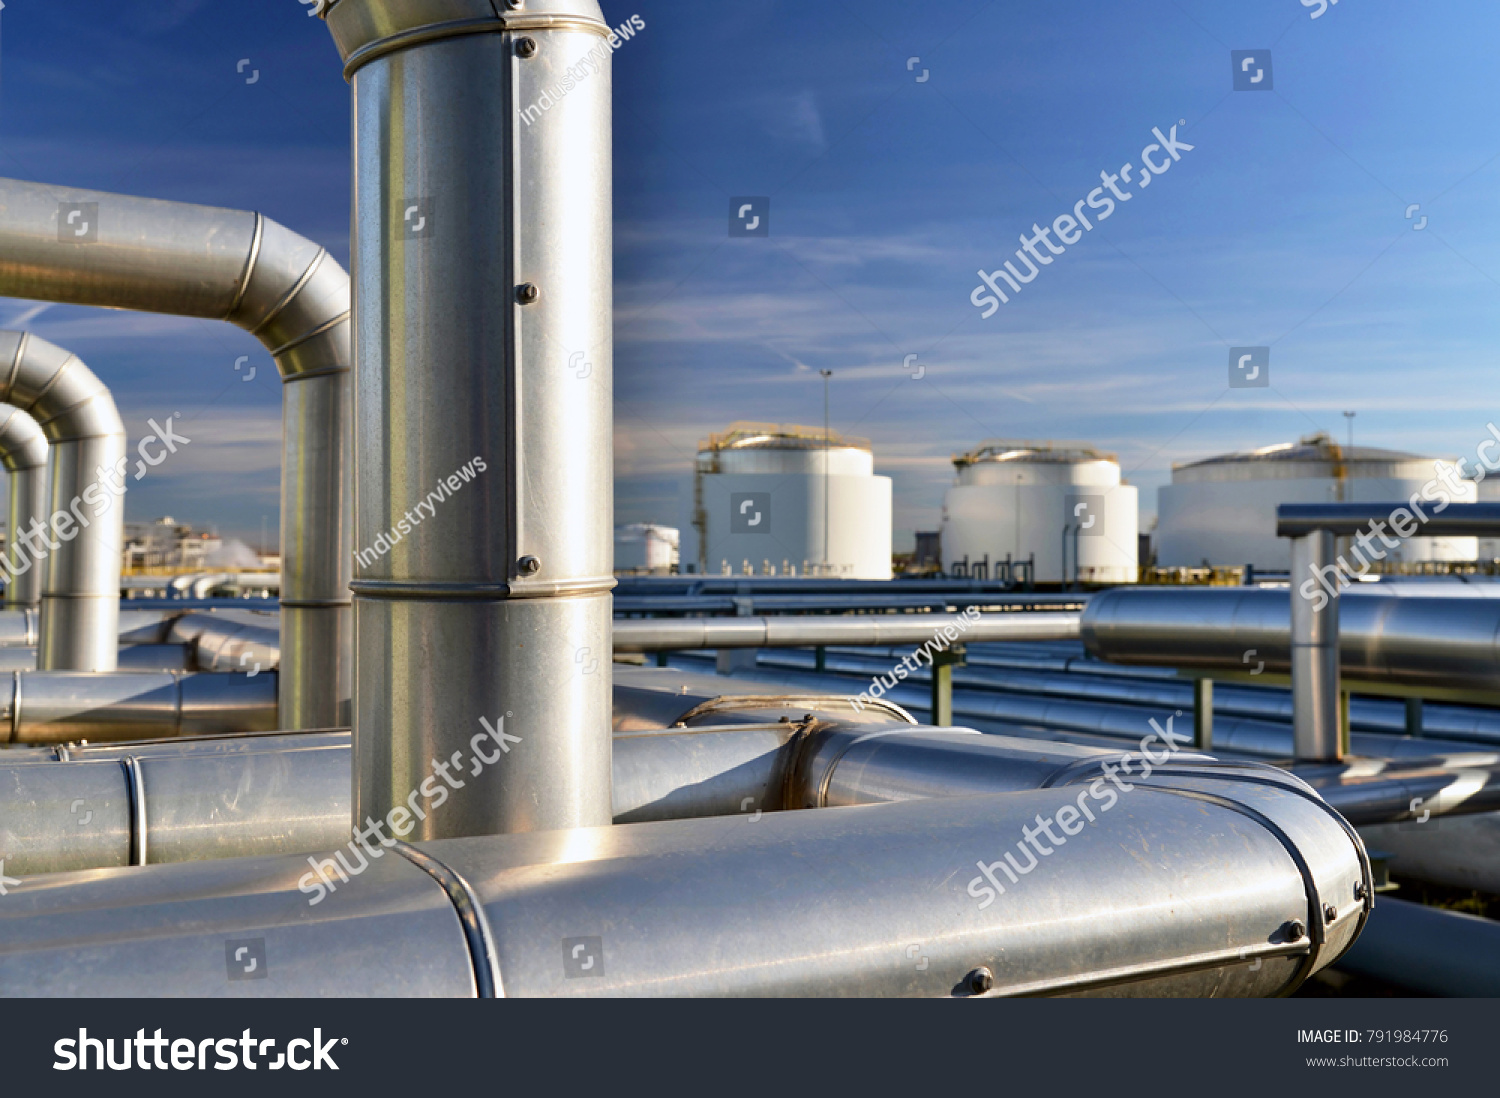 Refinery for the production of fuel - architecture and buildings of an industrial complex  #791984776